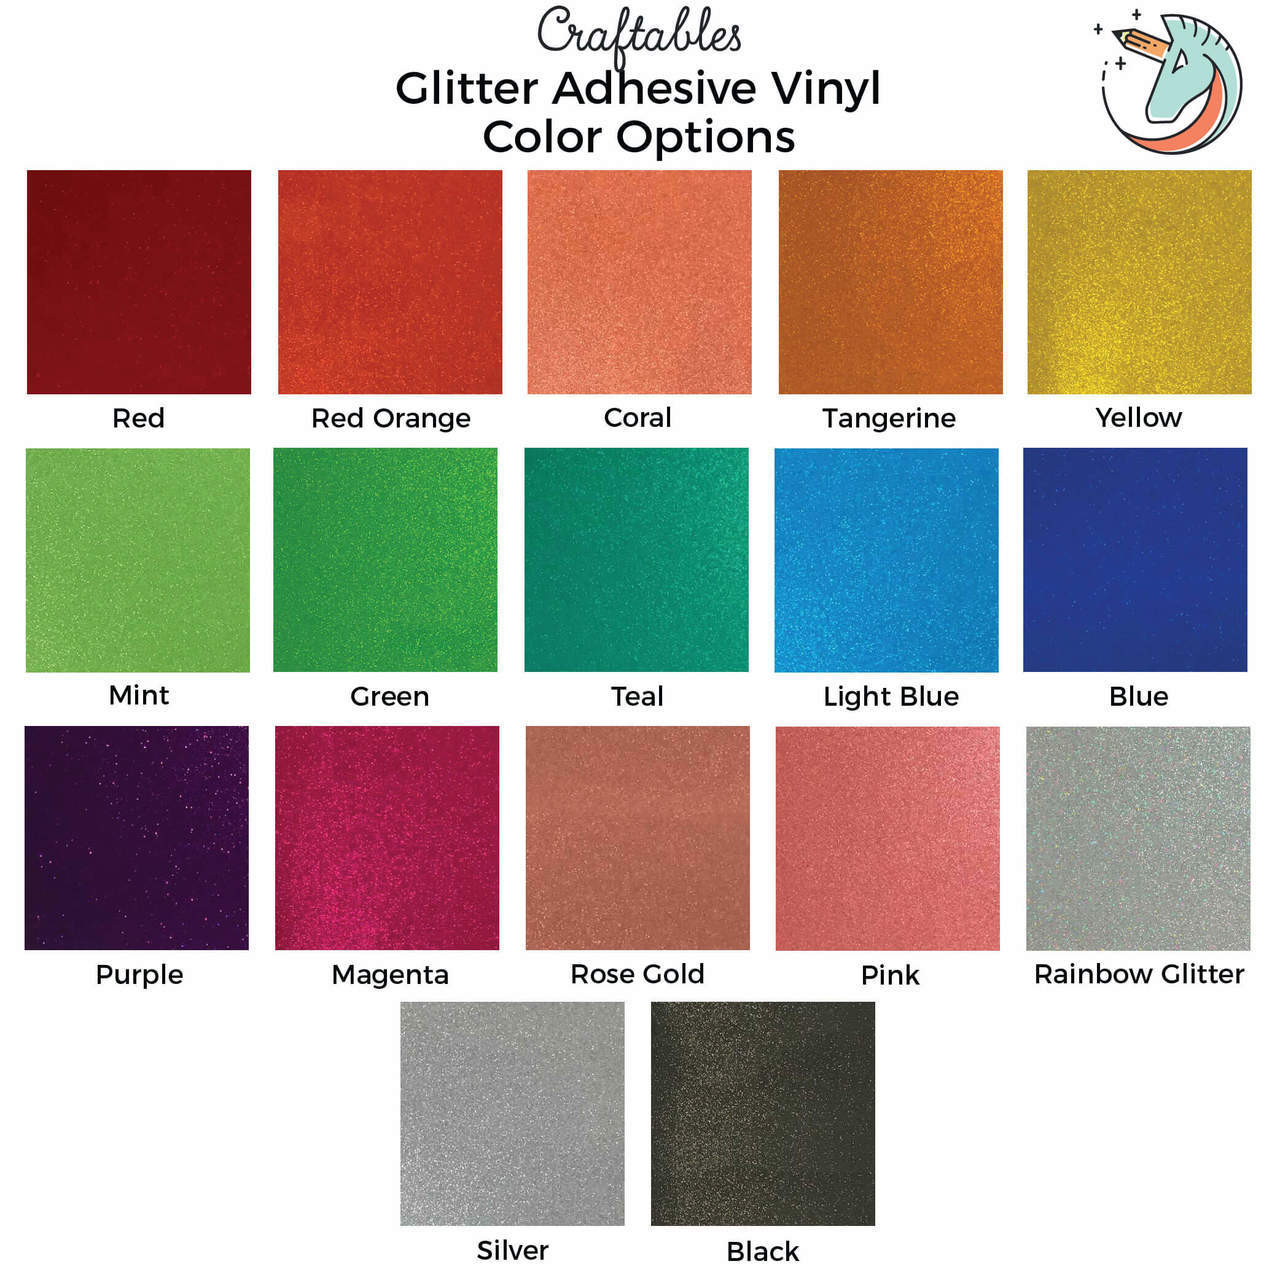 Black Glitter Adhesive Vinyl Sheets By Craftables